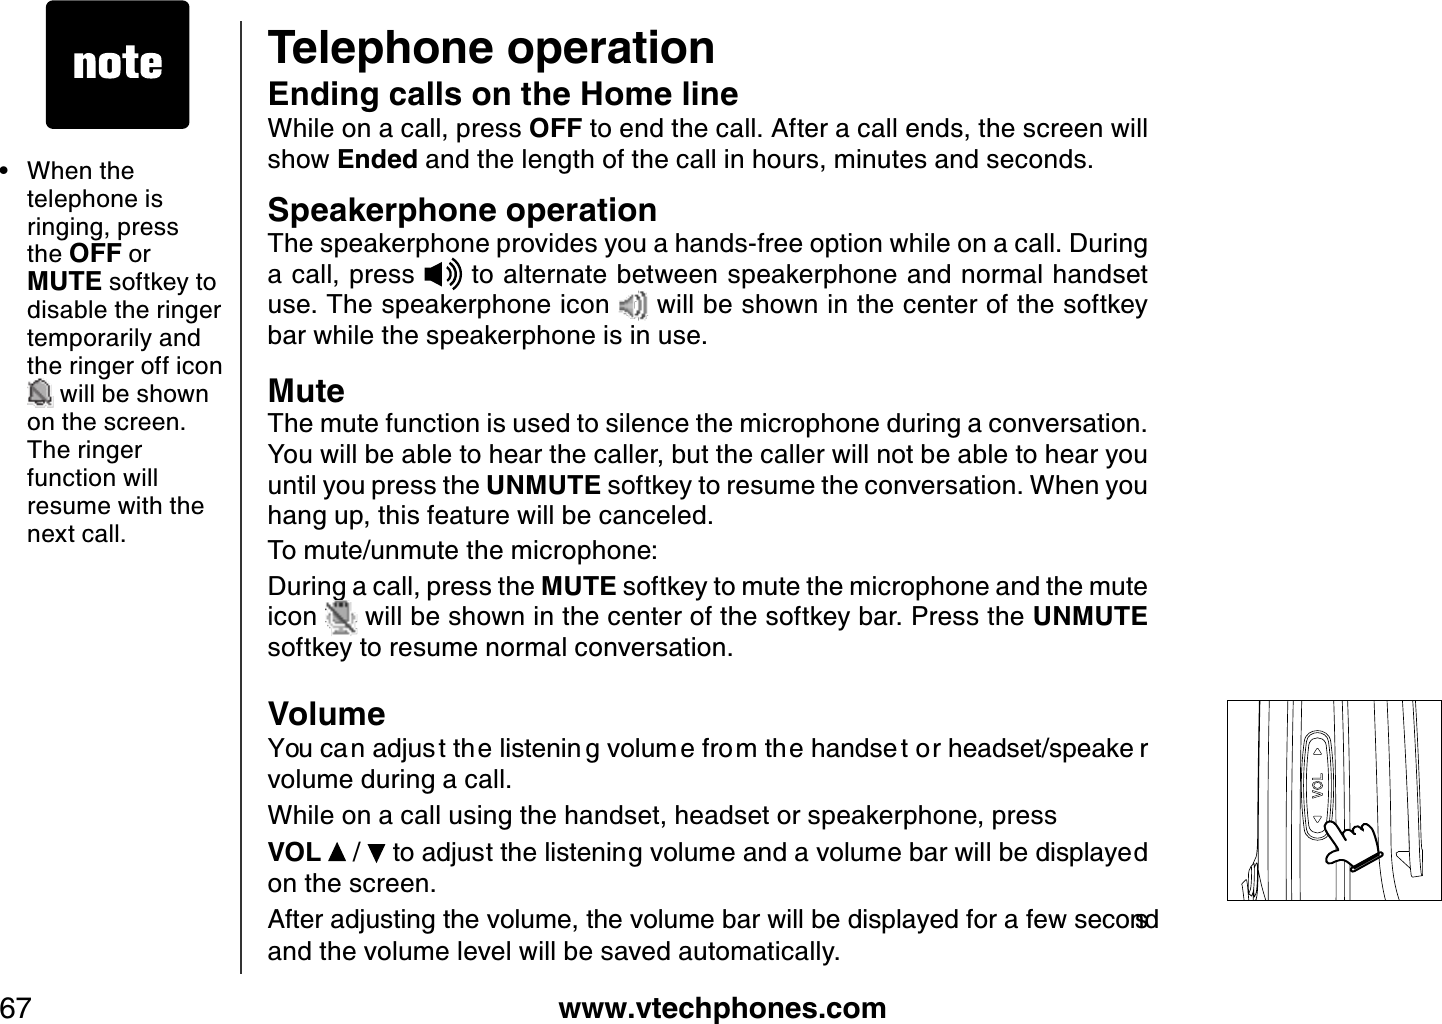 www.vtechphones.com67Telephone operation• When the telephone is ringing, press the OFF or MUTE softkey to disable the ringer temporarily and the ringer off icon will be shown on the screen. The ringer function will resume with the next call. Options MuteEnding calls on the Home lineWhile on a call, press OFF to end the call. After a call ends, the screen will show Ended and the length of the call in hours, minutes and seconds.Speakerphone operationThe speakerphone provides you a hands-free option while on a call. During a call, press   to alternate between speakerphone and normal handset use. The speakerphone icon   will be shown in the center of the softkey bar while the speakerphone is in use.MuteThe mute function is used to silence the microphone during a conversation. You will be able to hear the caller, but the caller will not be able to hear you until you press the UNMUTE softkey to resume the conversation. When you hang up, this feature will be canceled.To mute/unmute the microphone:During a call, press the MUTE softkey to mute the microphone and the mute icon   will be shown in the center of the softkey bar. Press the UNMUTEsoftkey to resume normal conversation.Volume;QWEC PCFLWU VVJGNKUVGPKP IXQNWO GHTQOVJ GJCPFUG VQTJGCFUGVURGCMG Tvolume during a call.While on a call using the handset, headset or speakerphone, press VOL  /  VQCFLWUVVJGNKUVGPKPIXQNWOGCPFCXQNWOGDCTYKNNDGFKURNC[GFon the screen. #HVGTCFLWUVKPIVJGXQNWOGVJGXQNWOGDCTYKNNDGFKURNC[GFHQTCHGYUGEQPFUand the volume level will be saved automatically.